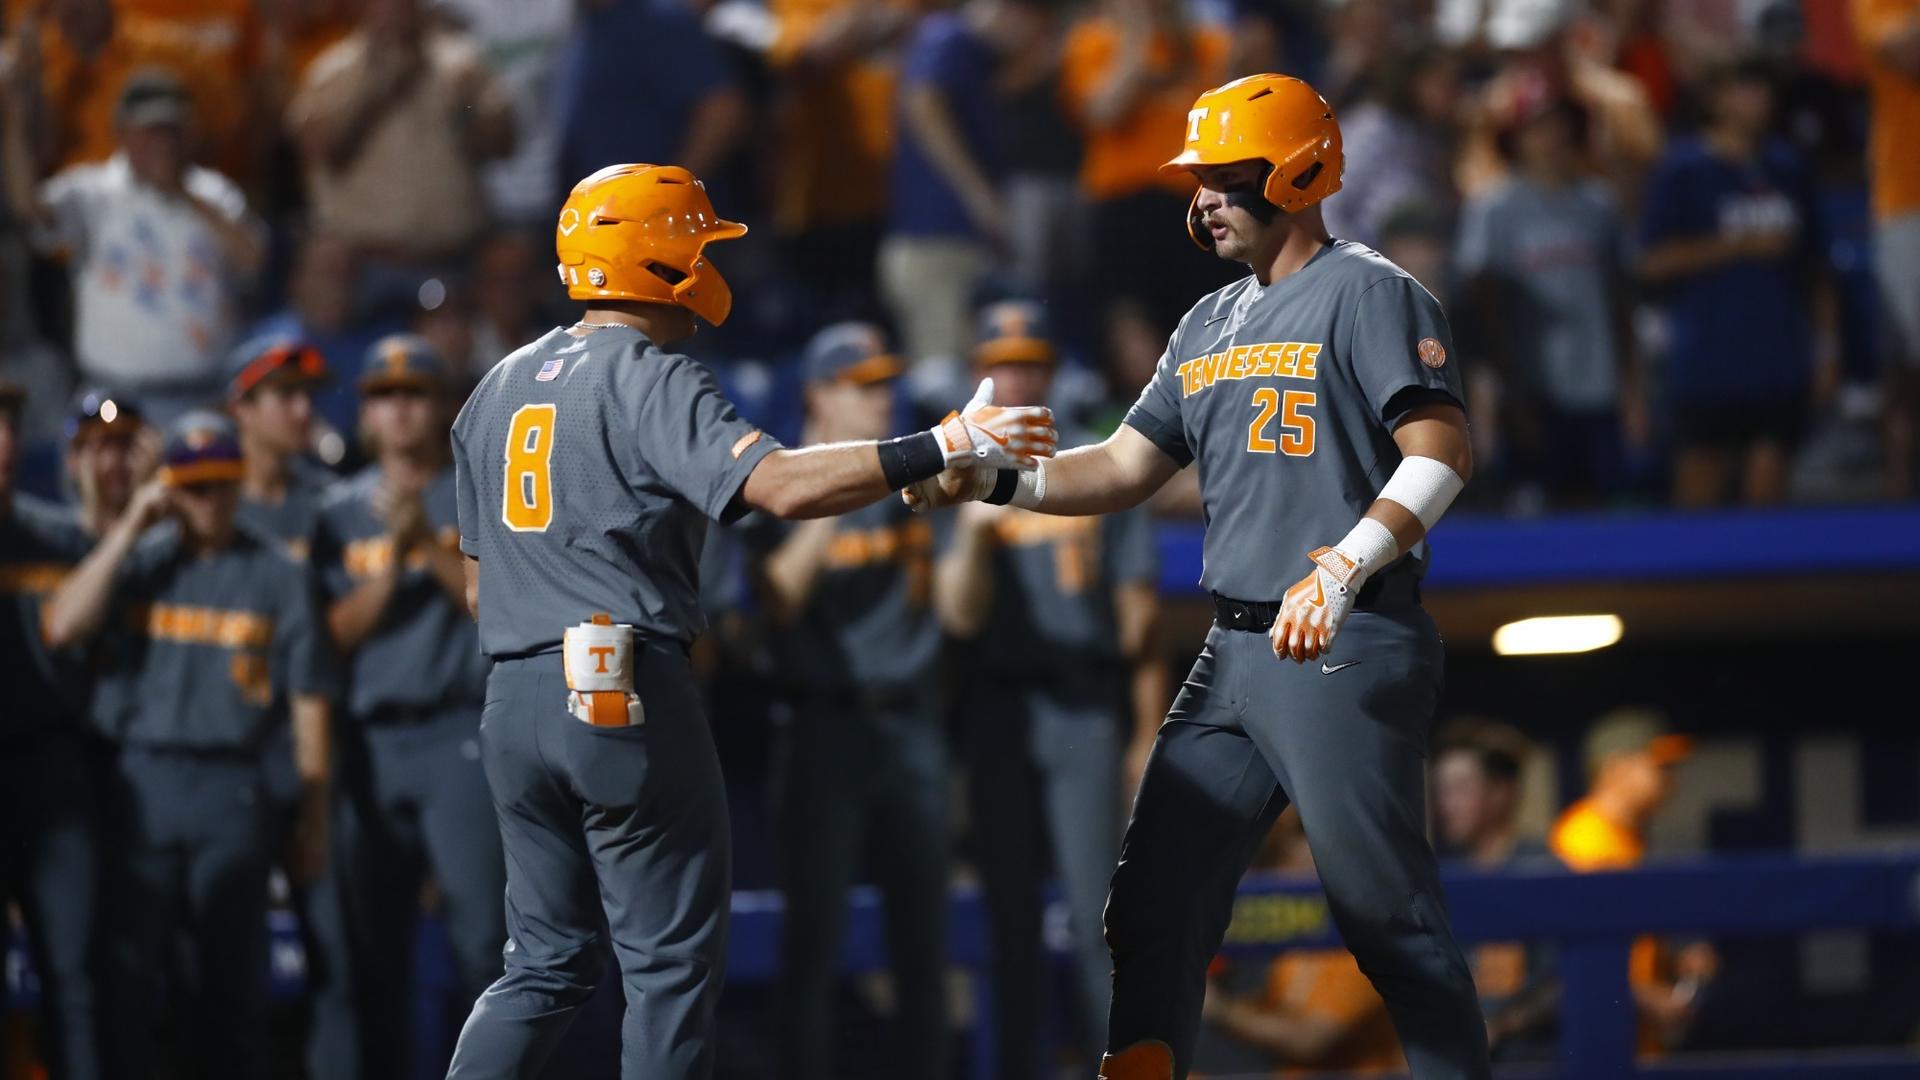 #1 Vols Secure Spot in SEC Tournament Semifinal with 6-5 Win Over #14 Bulldogs